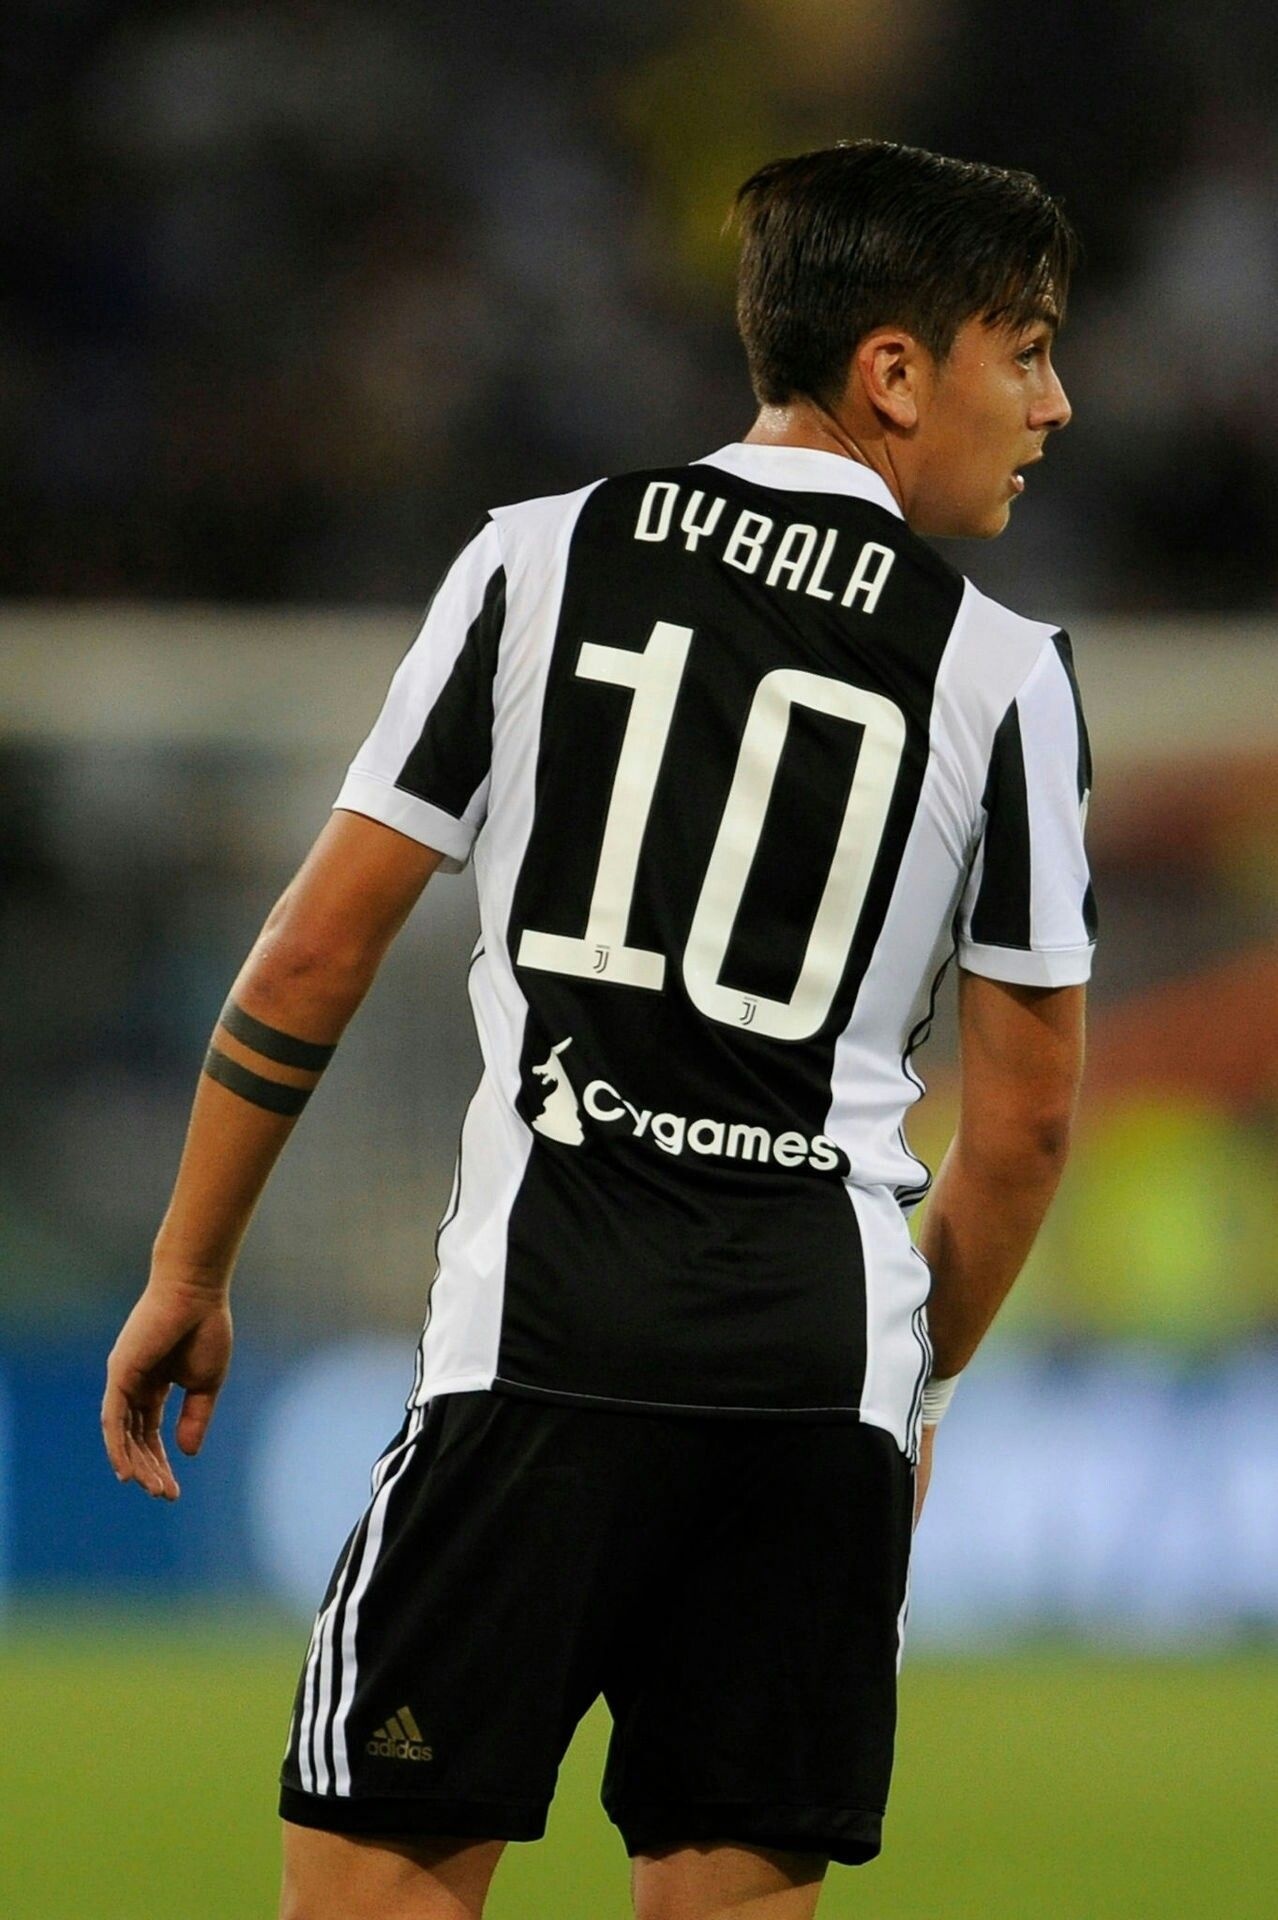 Dybala: Scored his first UEFA Champions League goal in a 2–2 home draw to Bayern Munich in Juventus' first round of 16 leg. 1280x1920 HD Wallpaper.